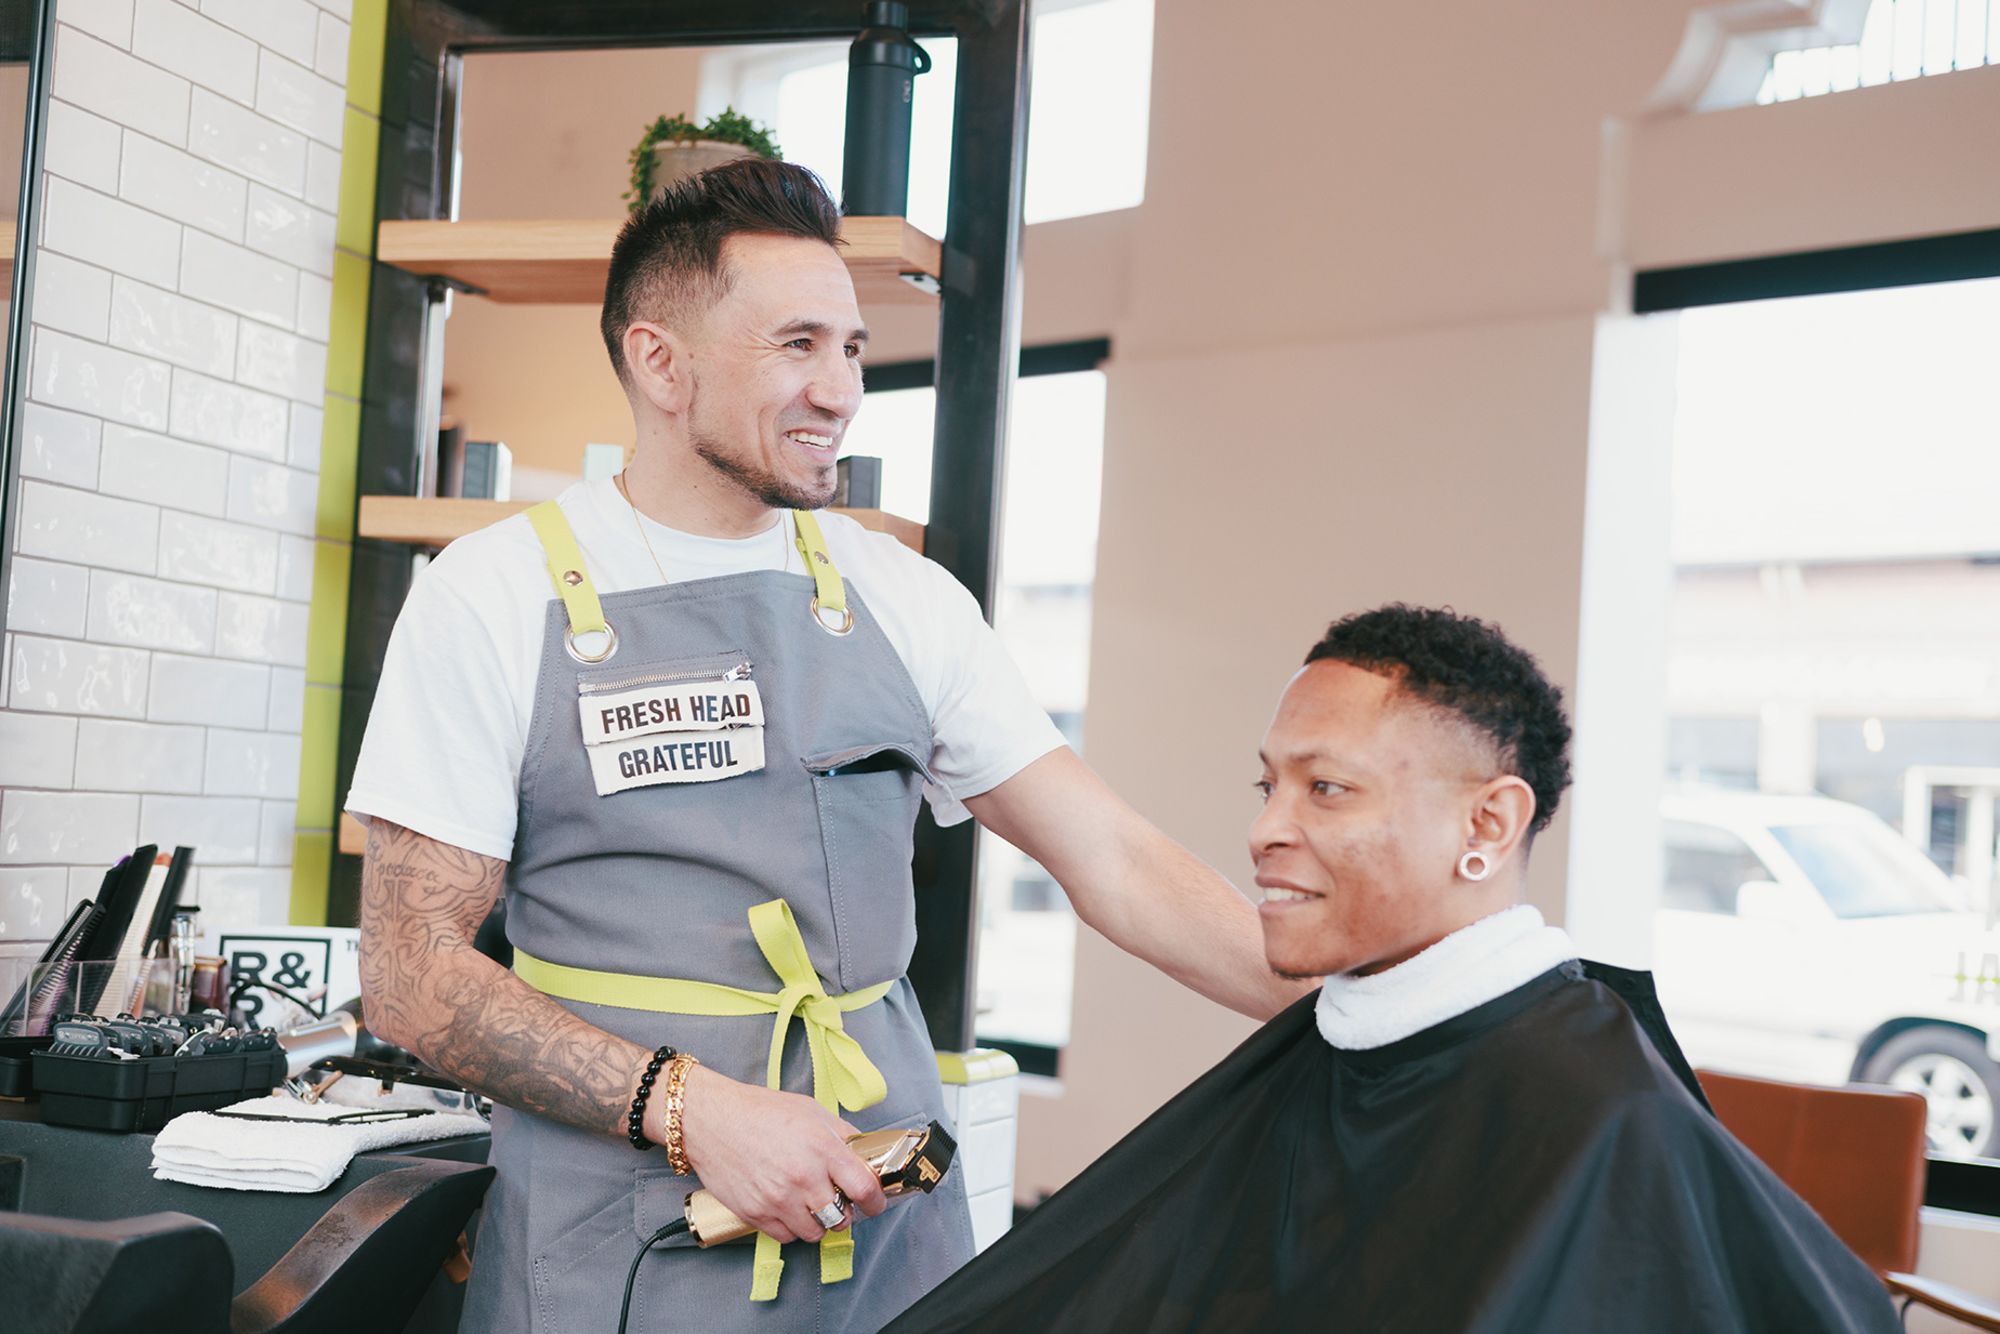 At R&R Head Labs in Denver, Colorado, barbers' aprons feature space for an interchangeable tag featuring a word that best describes their intention or vibe of the day. Pictured above, skilled apprentice Stephen Apodaca's says "grateful."